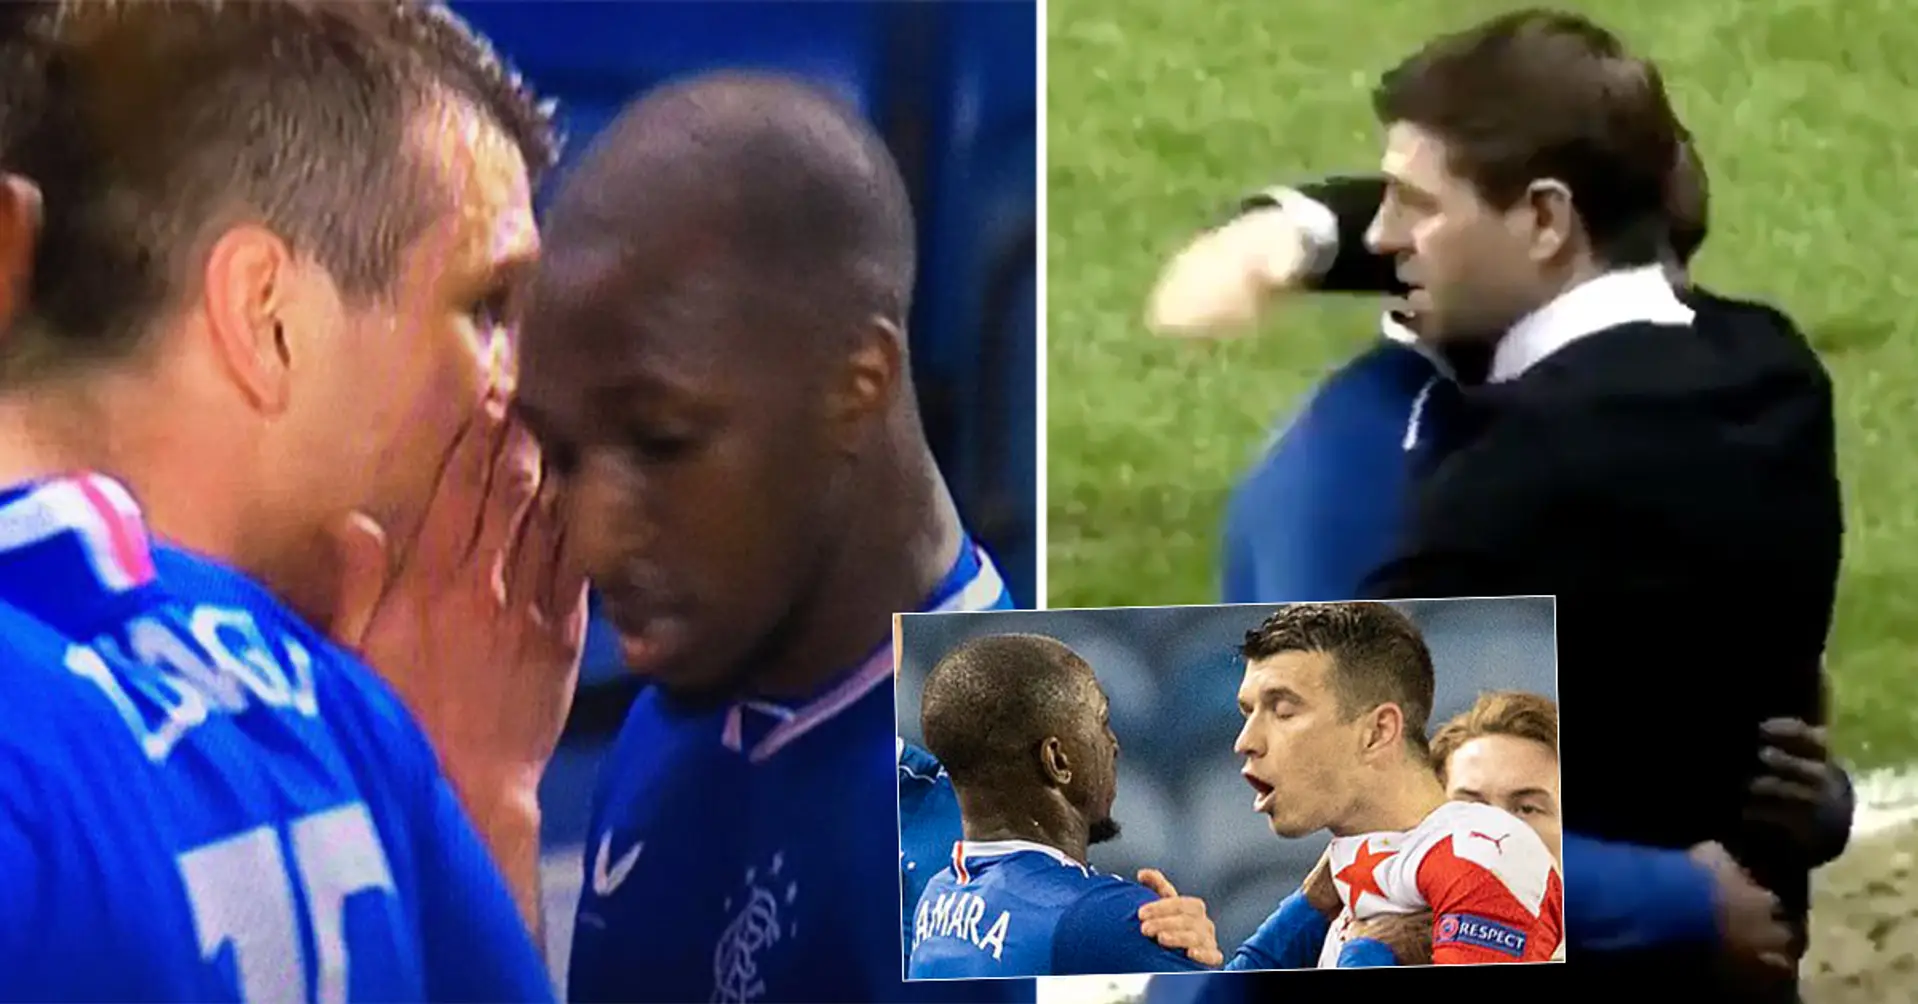 Rangers player Kamara: 'He covered his mouth and told me – 'You're f*** monkey, you know you are'